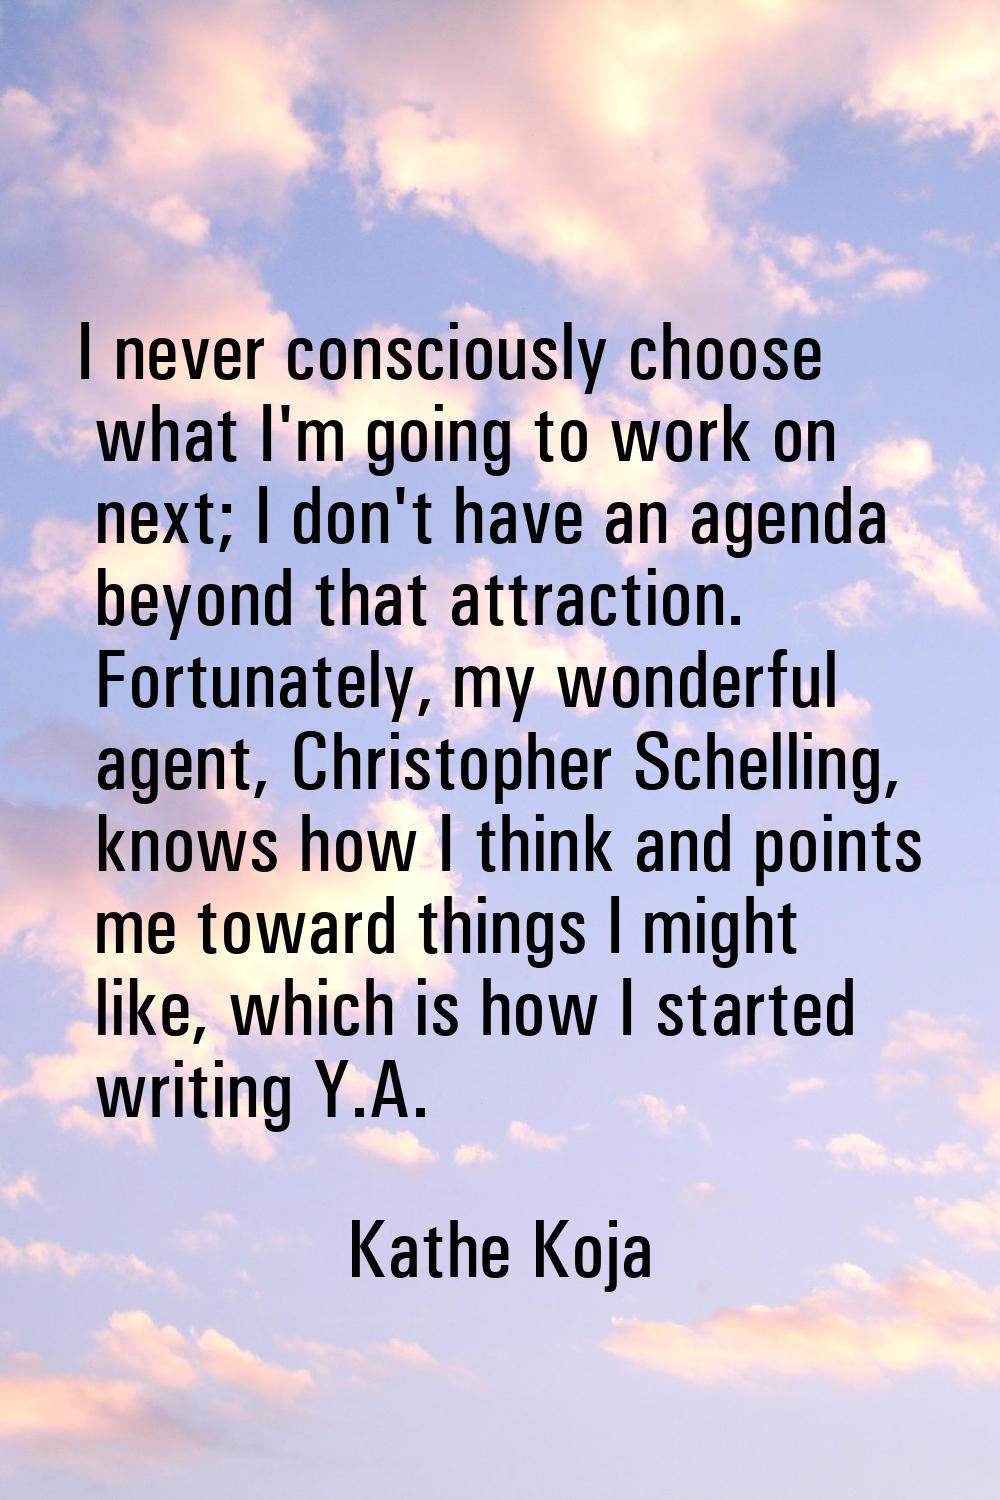 I never consciously choose what I'm going to work on next; I don't have an agenda beyond that attra